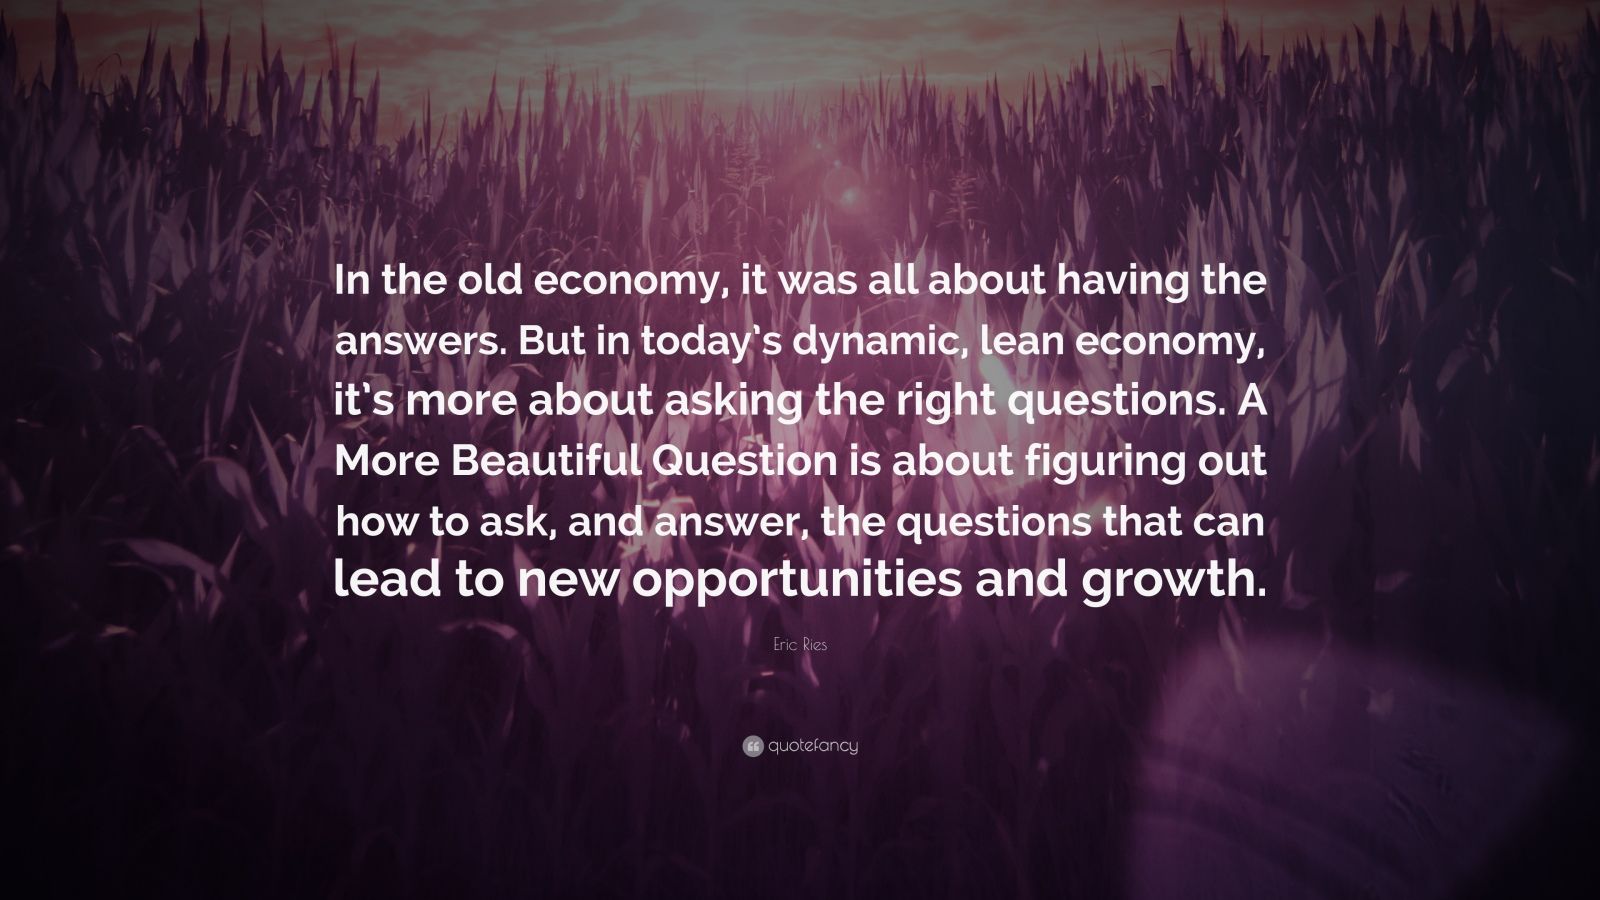 Growth Quotes (40 wallpapers) - Quotefancy